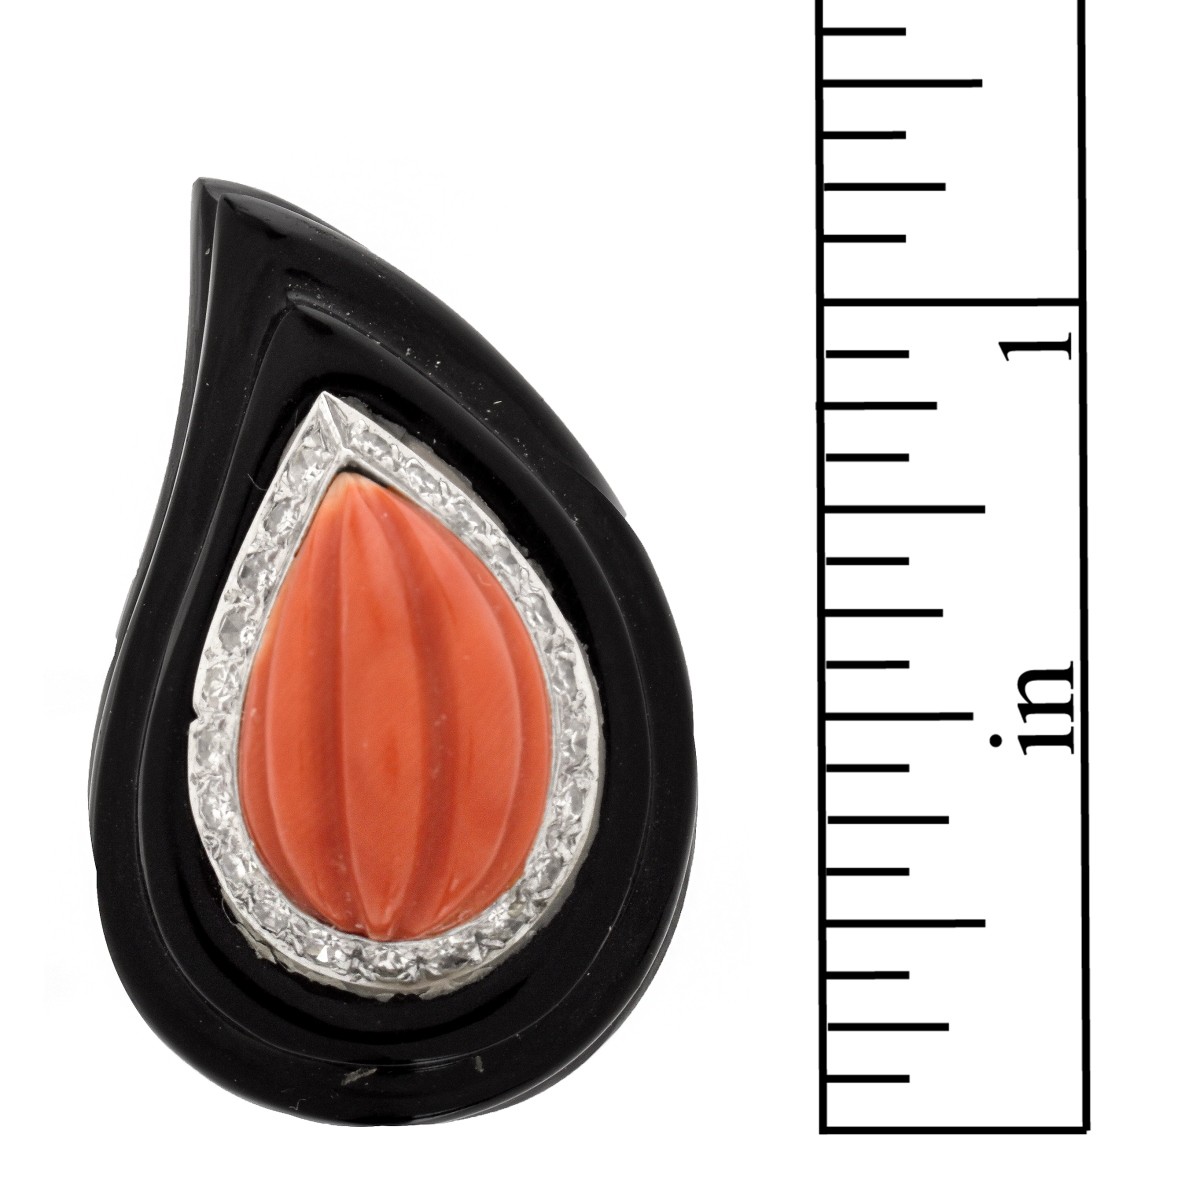 Coral, Onyx, Diamond and 14K Ring